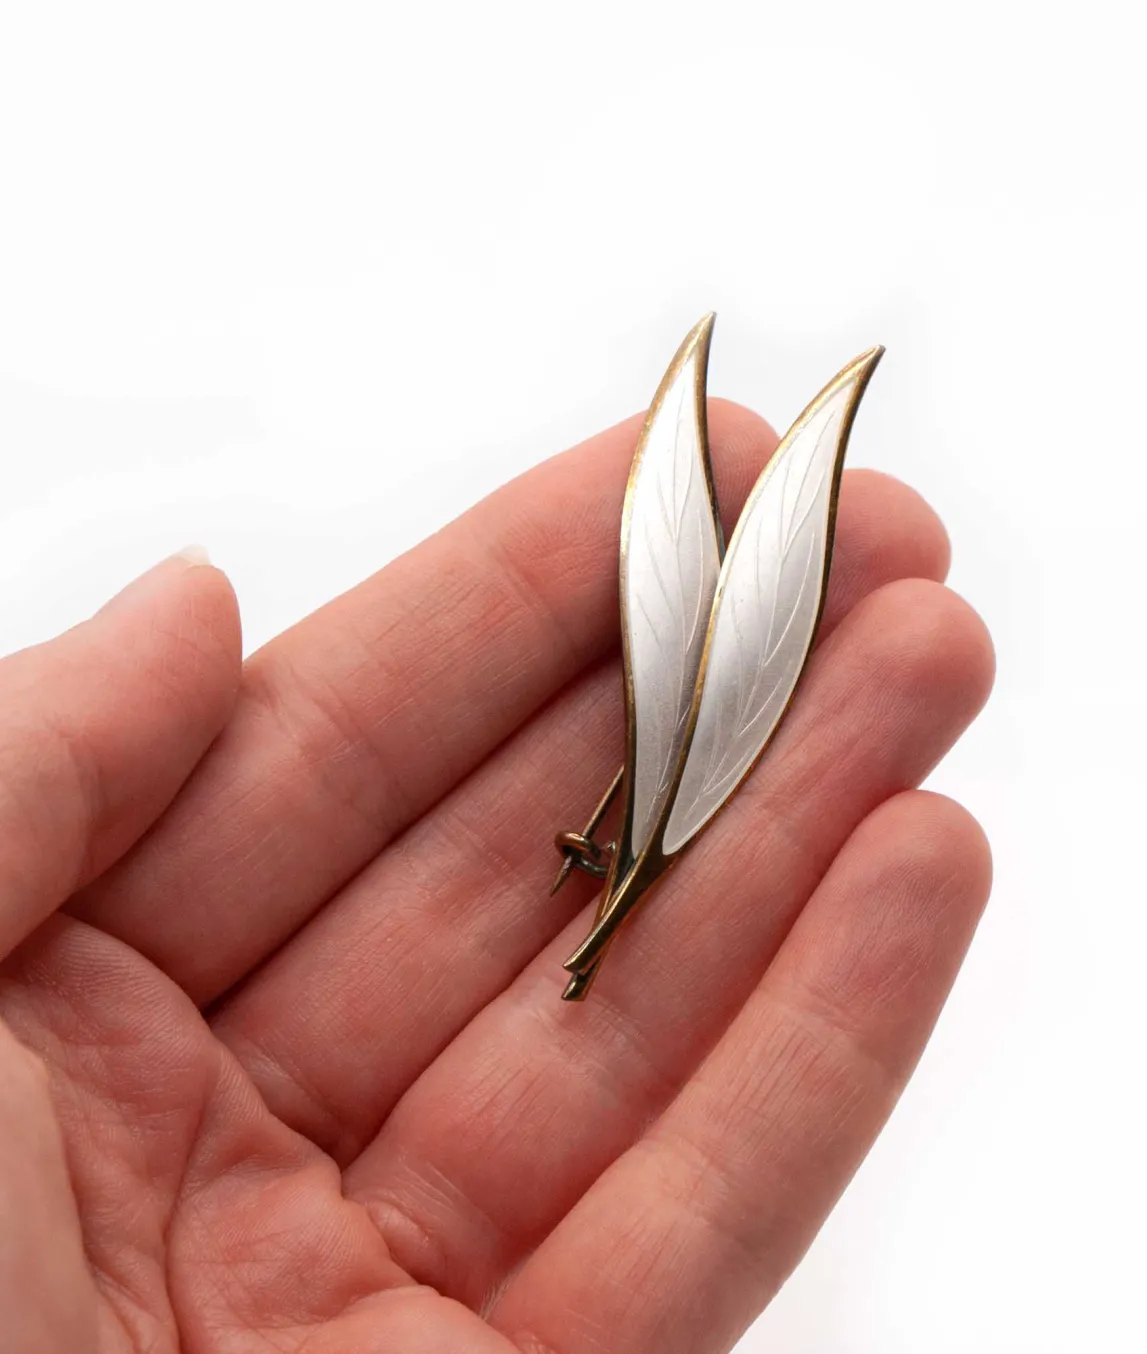 Double leaf brooch by NM Thune of Norway white enamel with gold edges held in hand